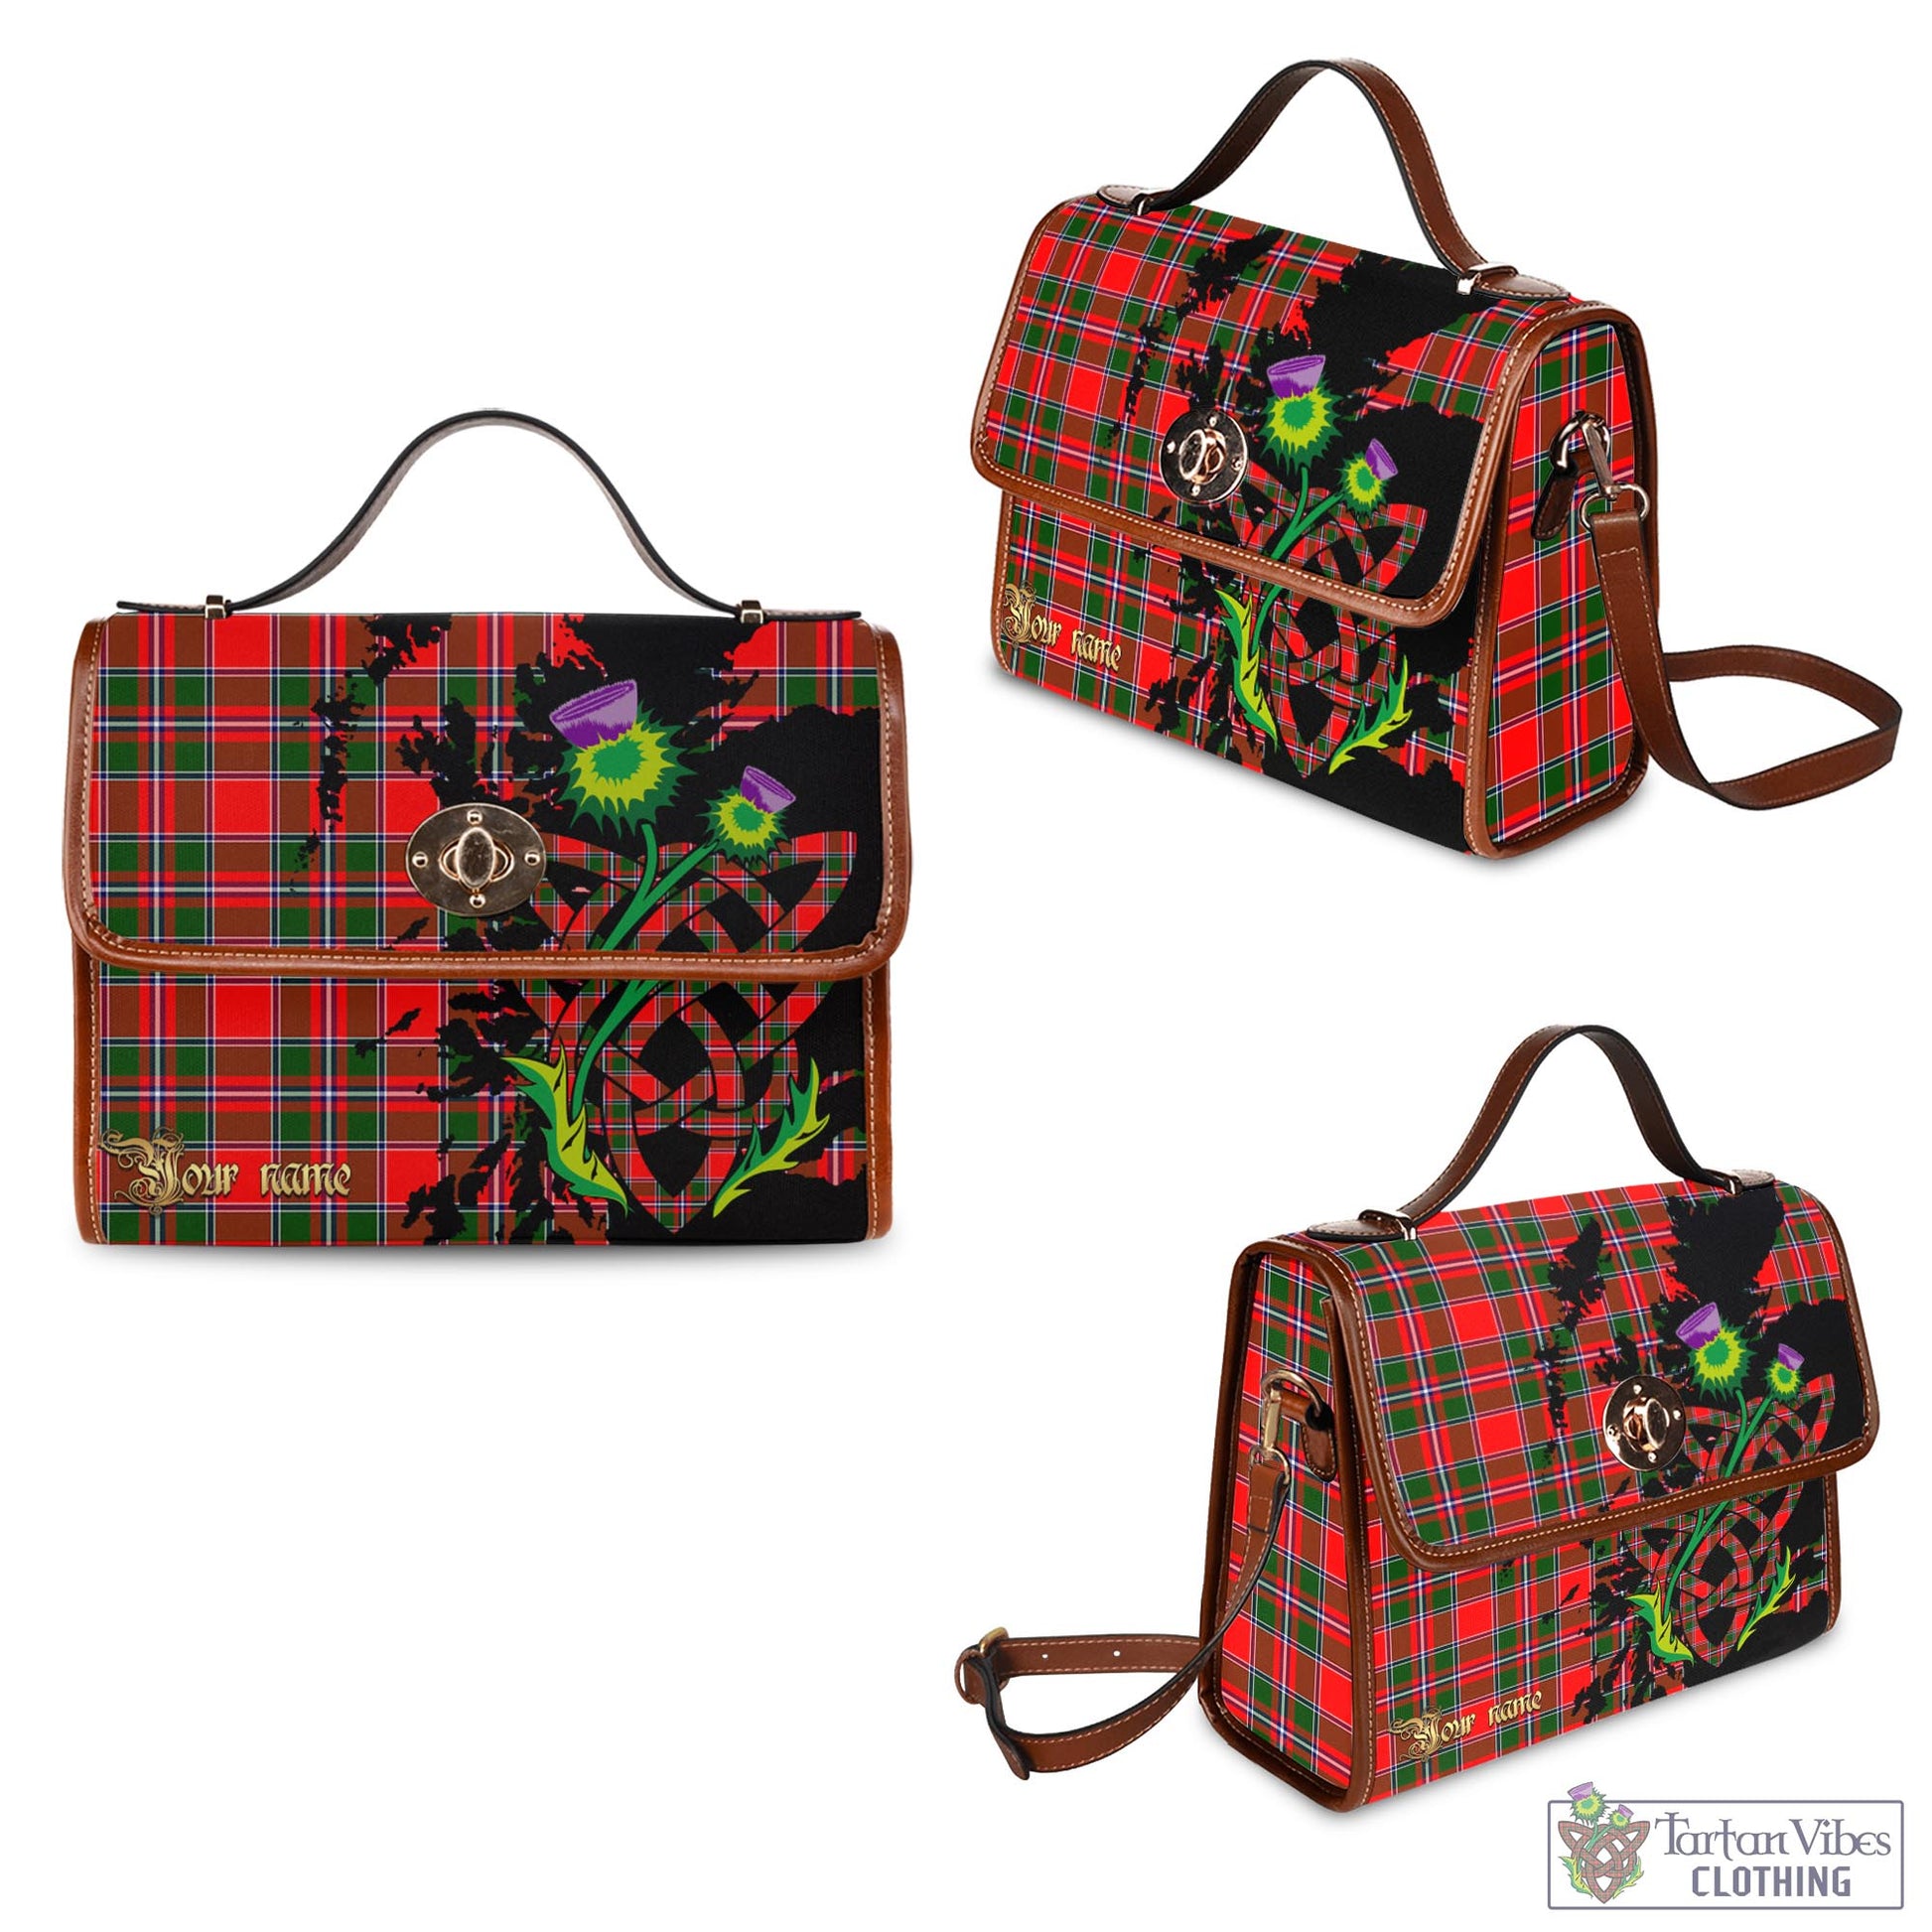 Tartan Vibes Clothing Spens Modern Tartan Waterproof Canvas Bag with Scotland Map and Thistle Celtic Accents